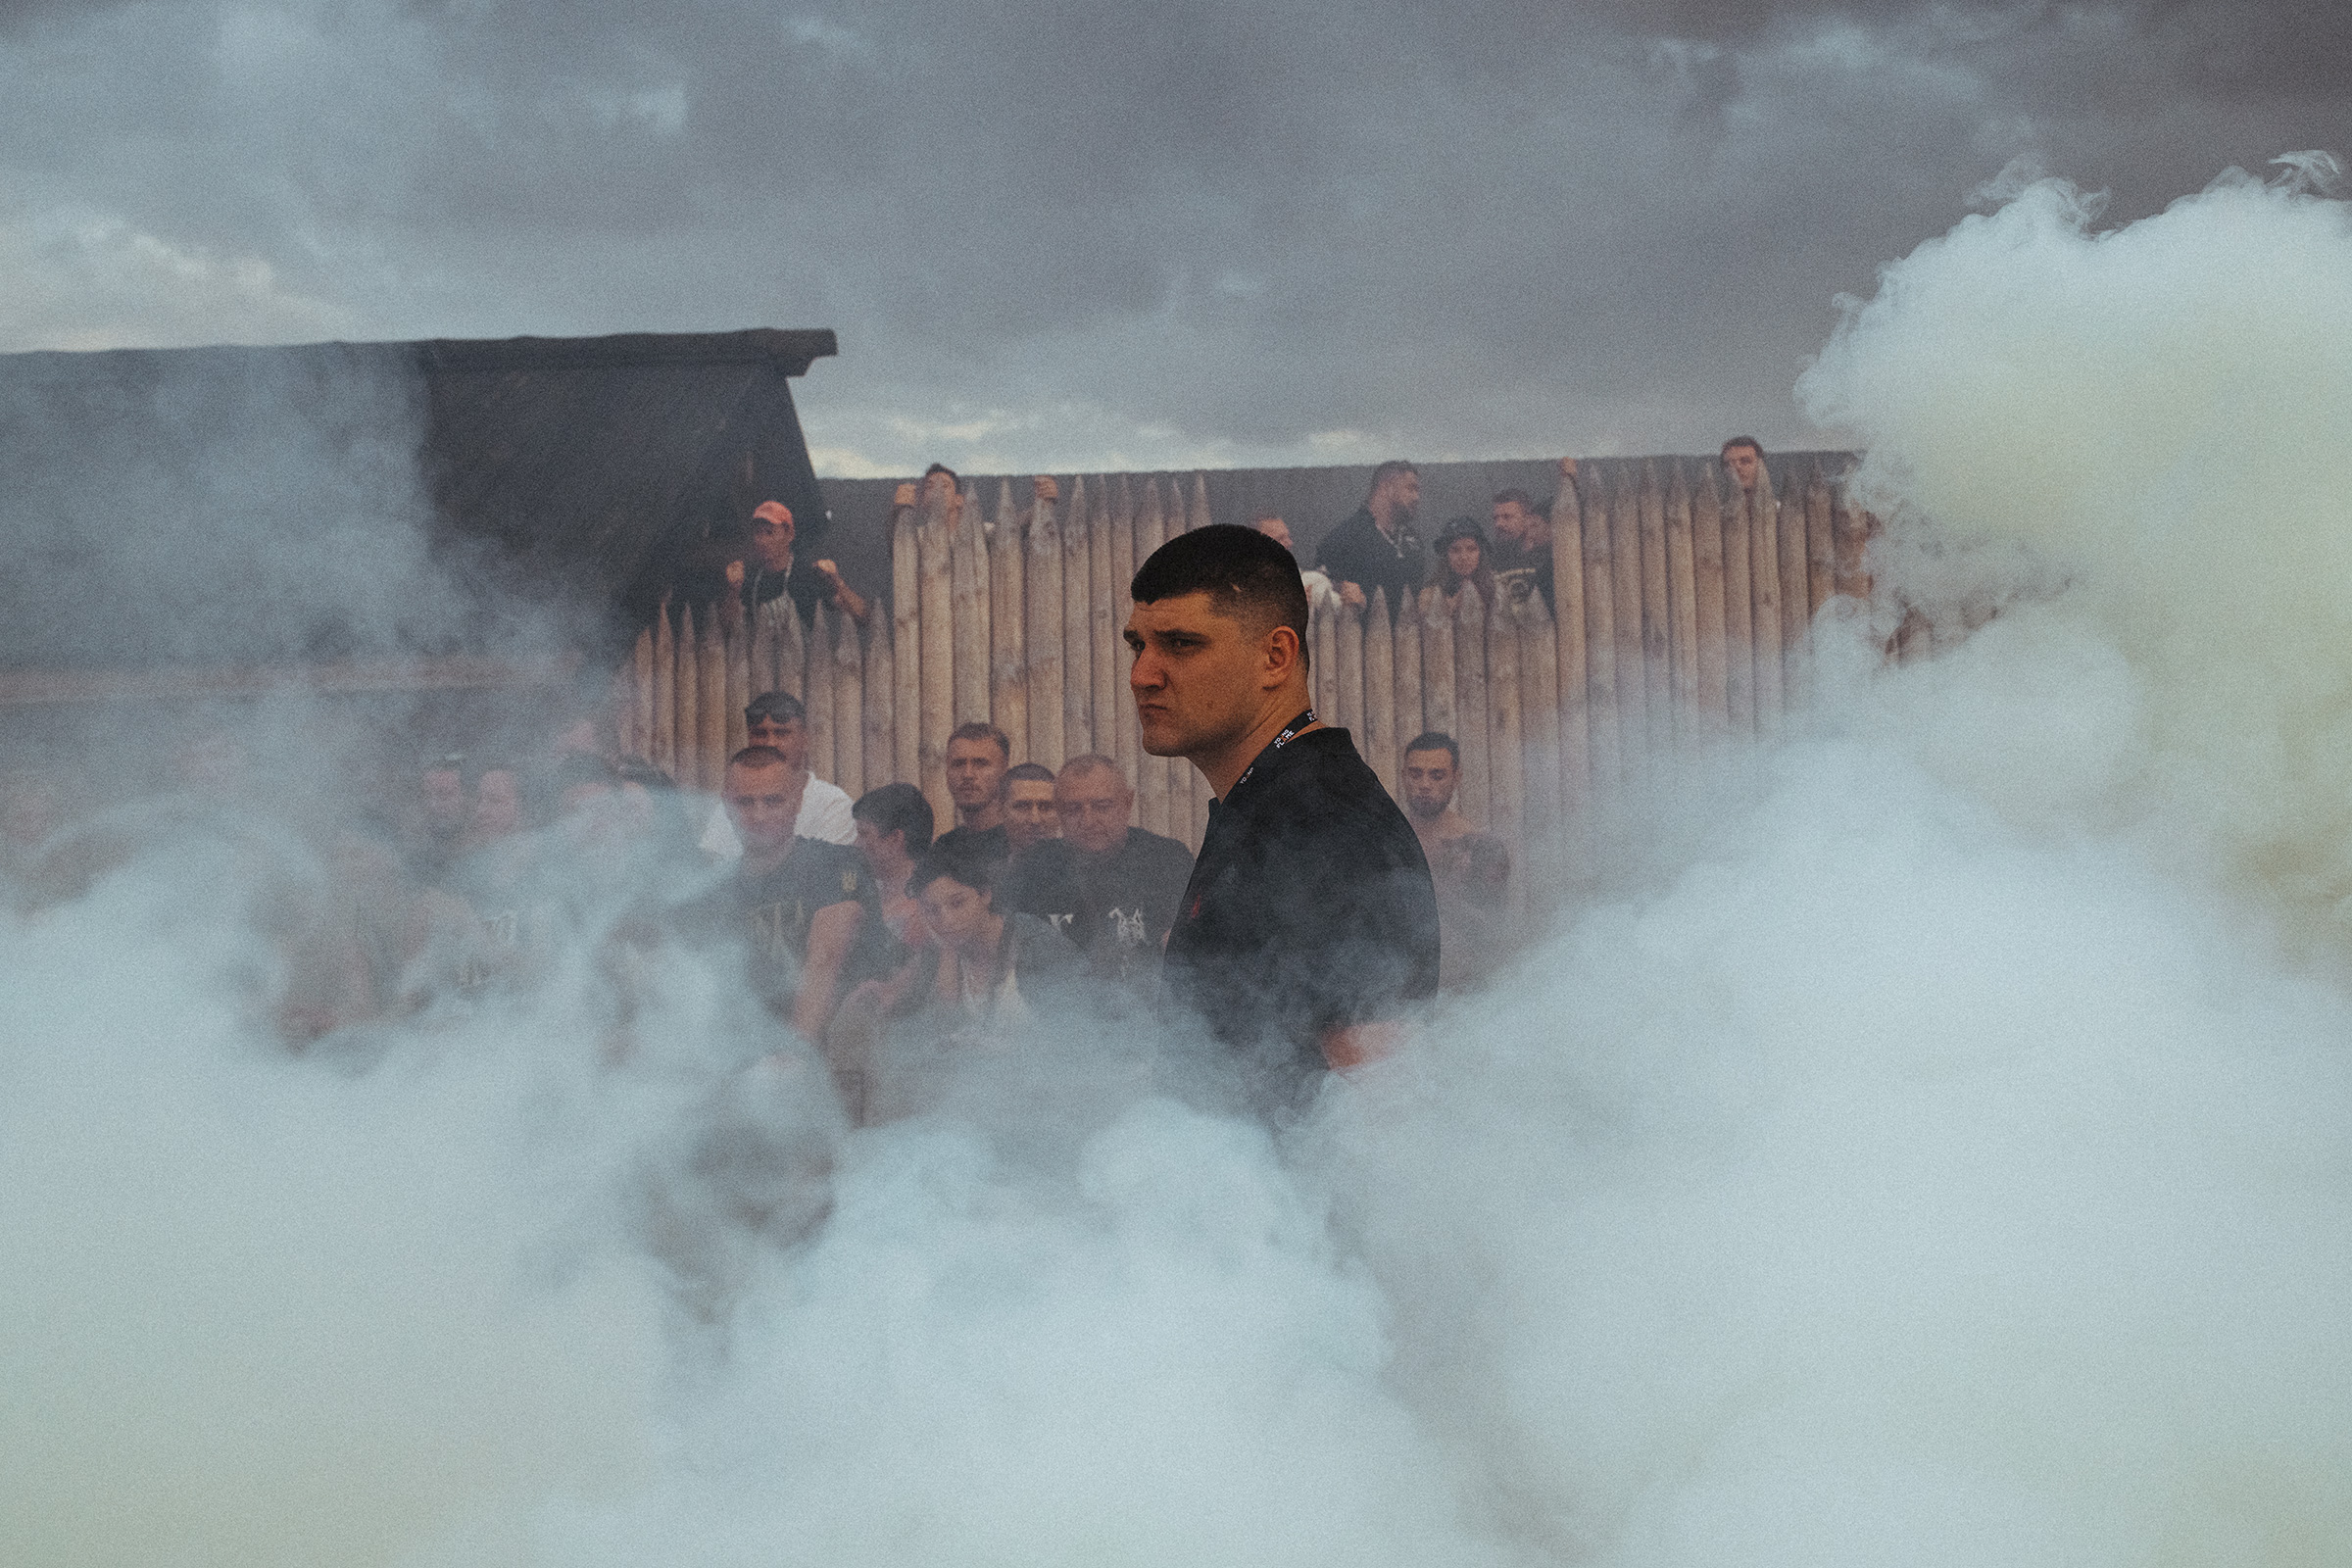 Denis Nikitin, a key figure in the Azov movement's outreach to right-wing extremists in the U.S. and Western Europe, at the Young Flame festival outside Kyiv, a major recruitment event he organized in August 2019. (Maxim Dondyuk—Maxim Dondyuk)